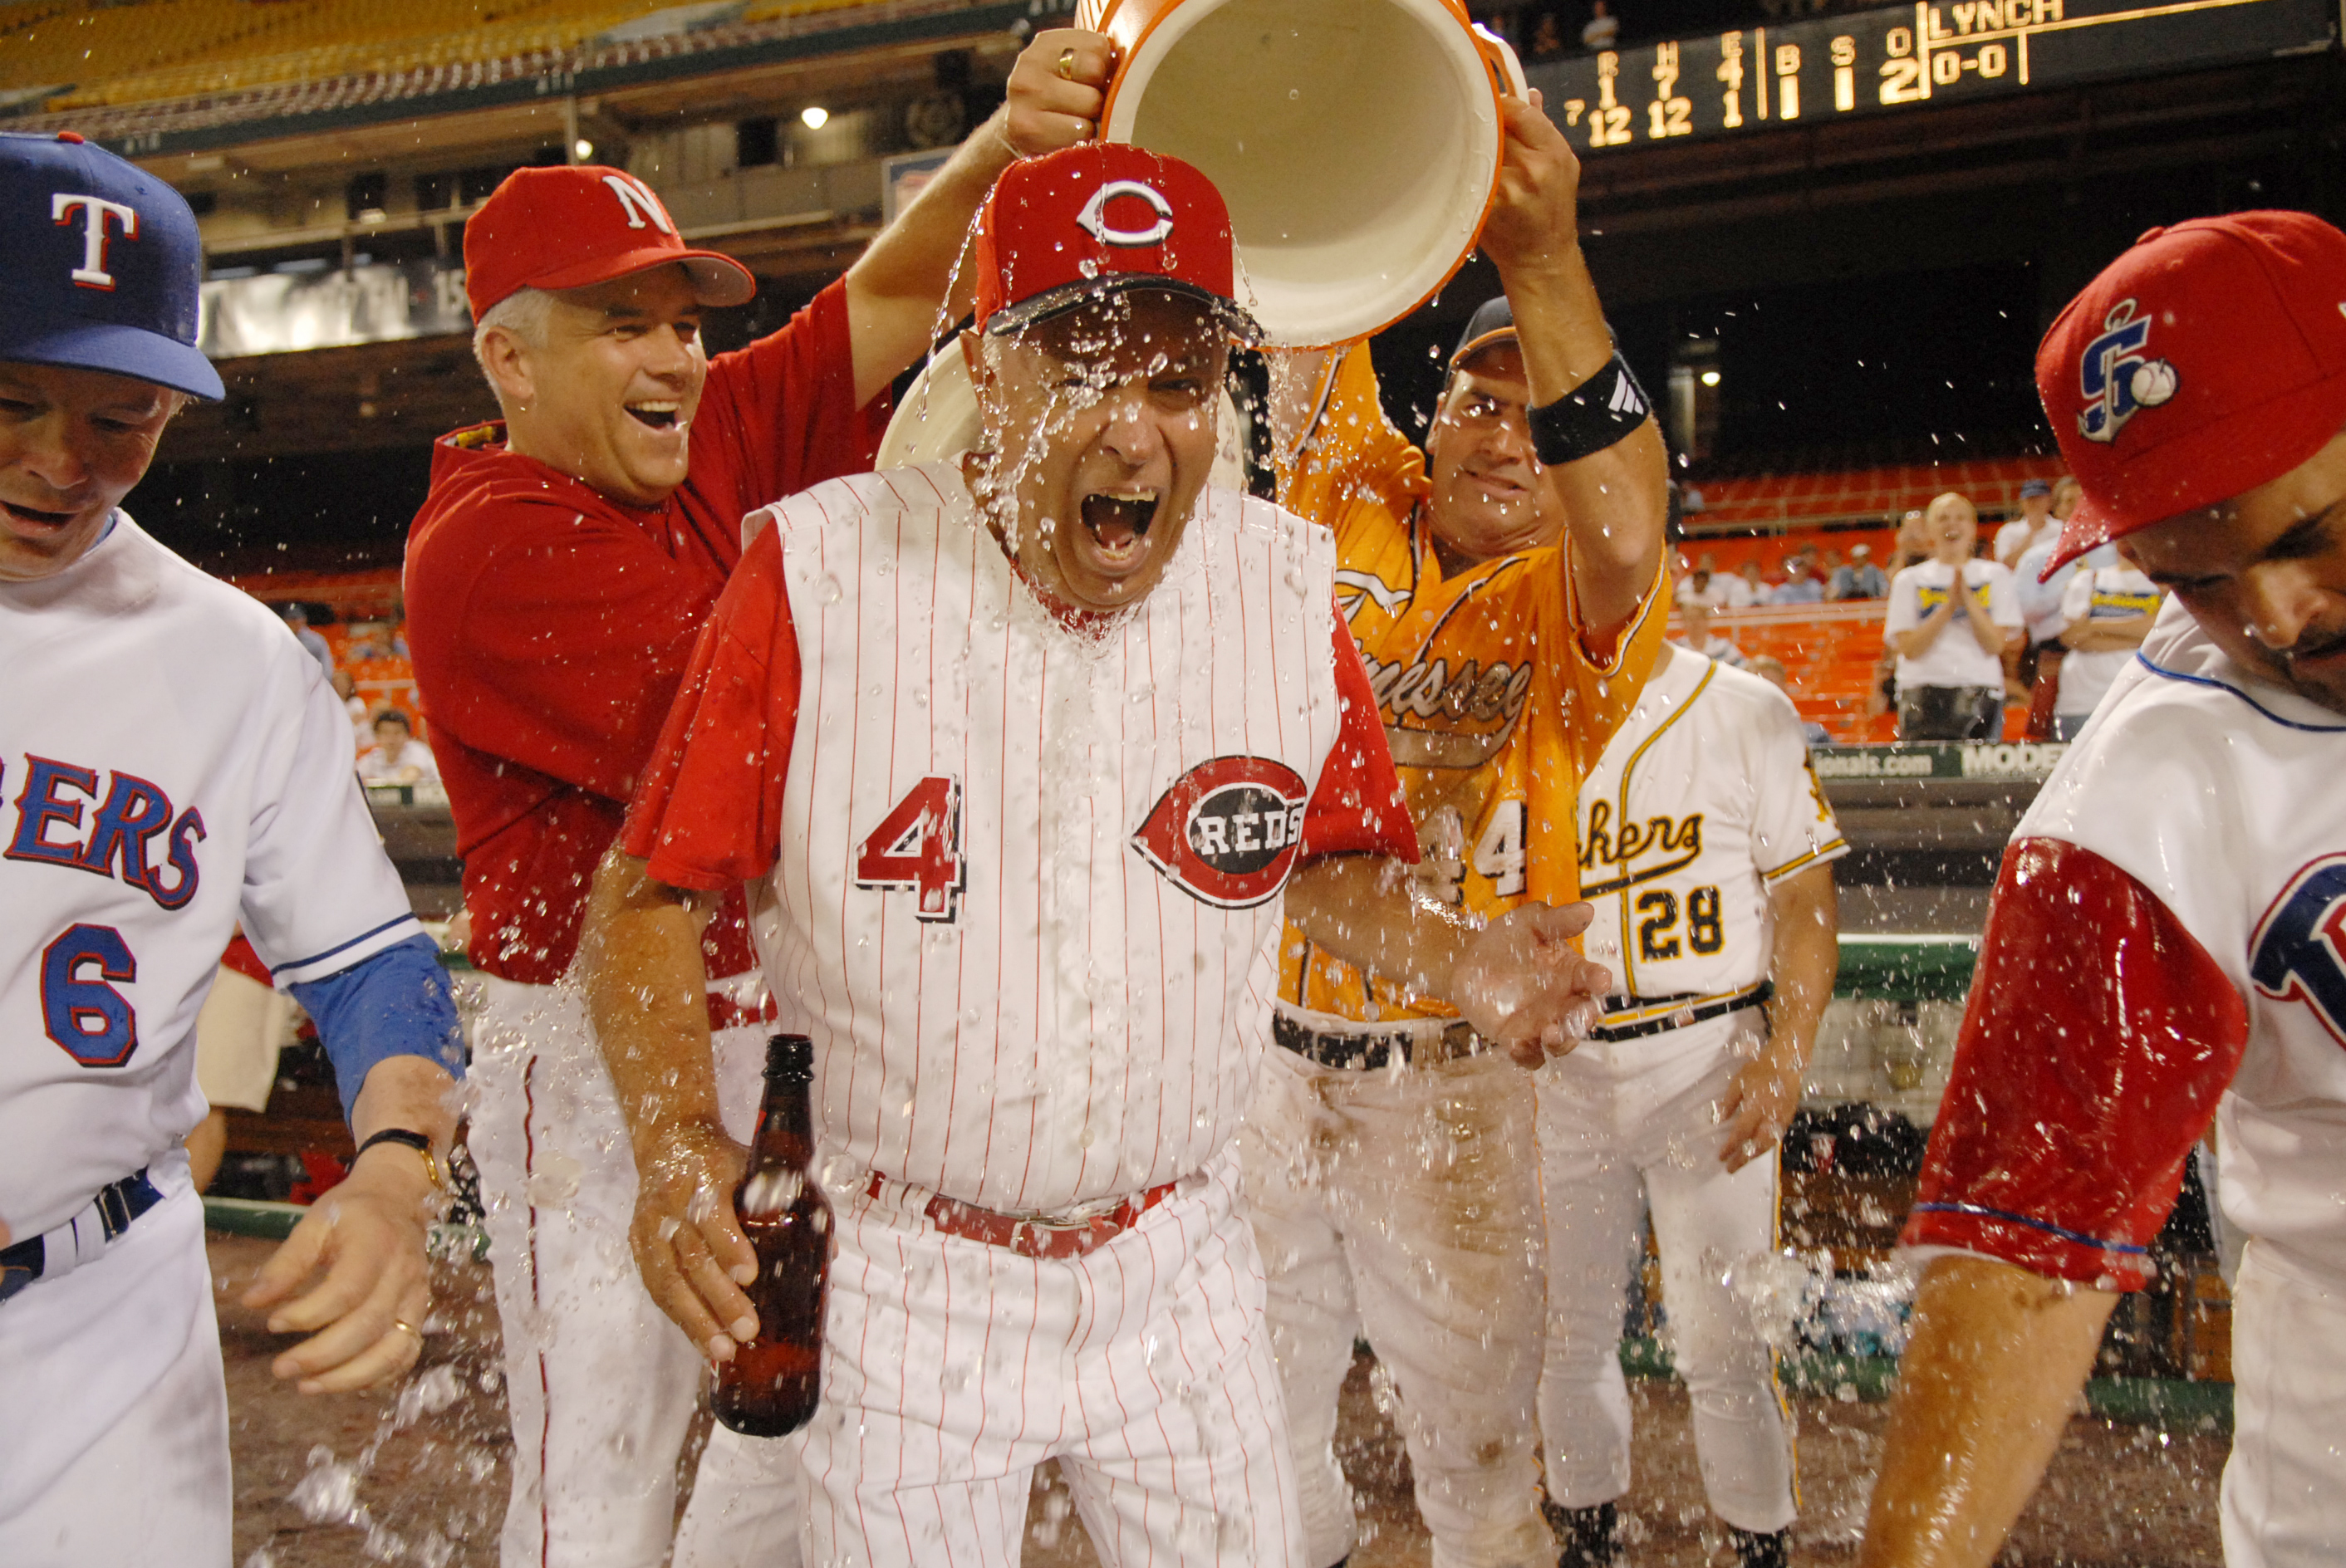 Coach Mike Oxley, R-Ohio, gets water dumped on him in celebration at the 45th Annual Roll Call Congressional Baseball game played at RFK stadium. (Tom Williams—AP)